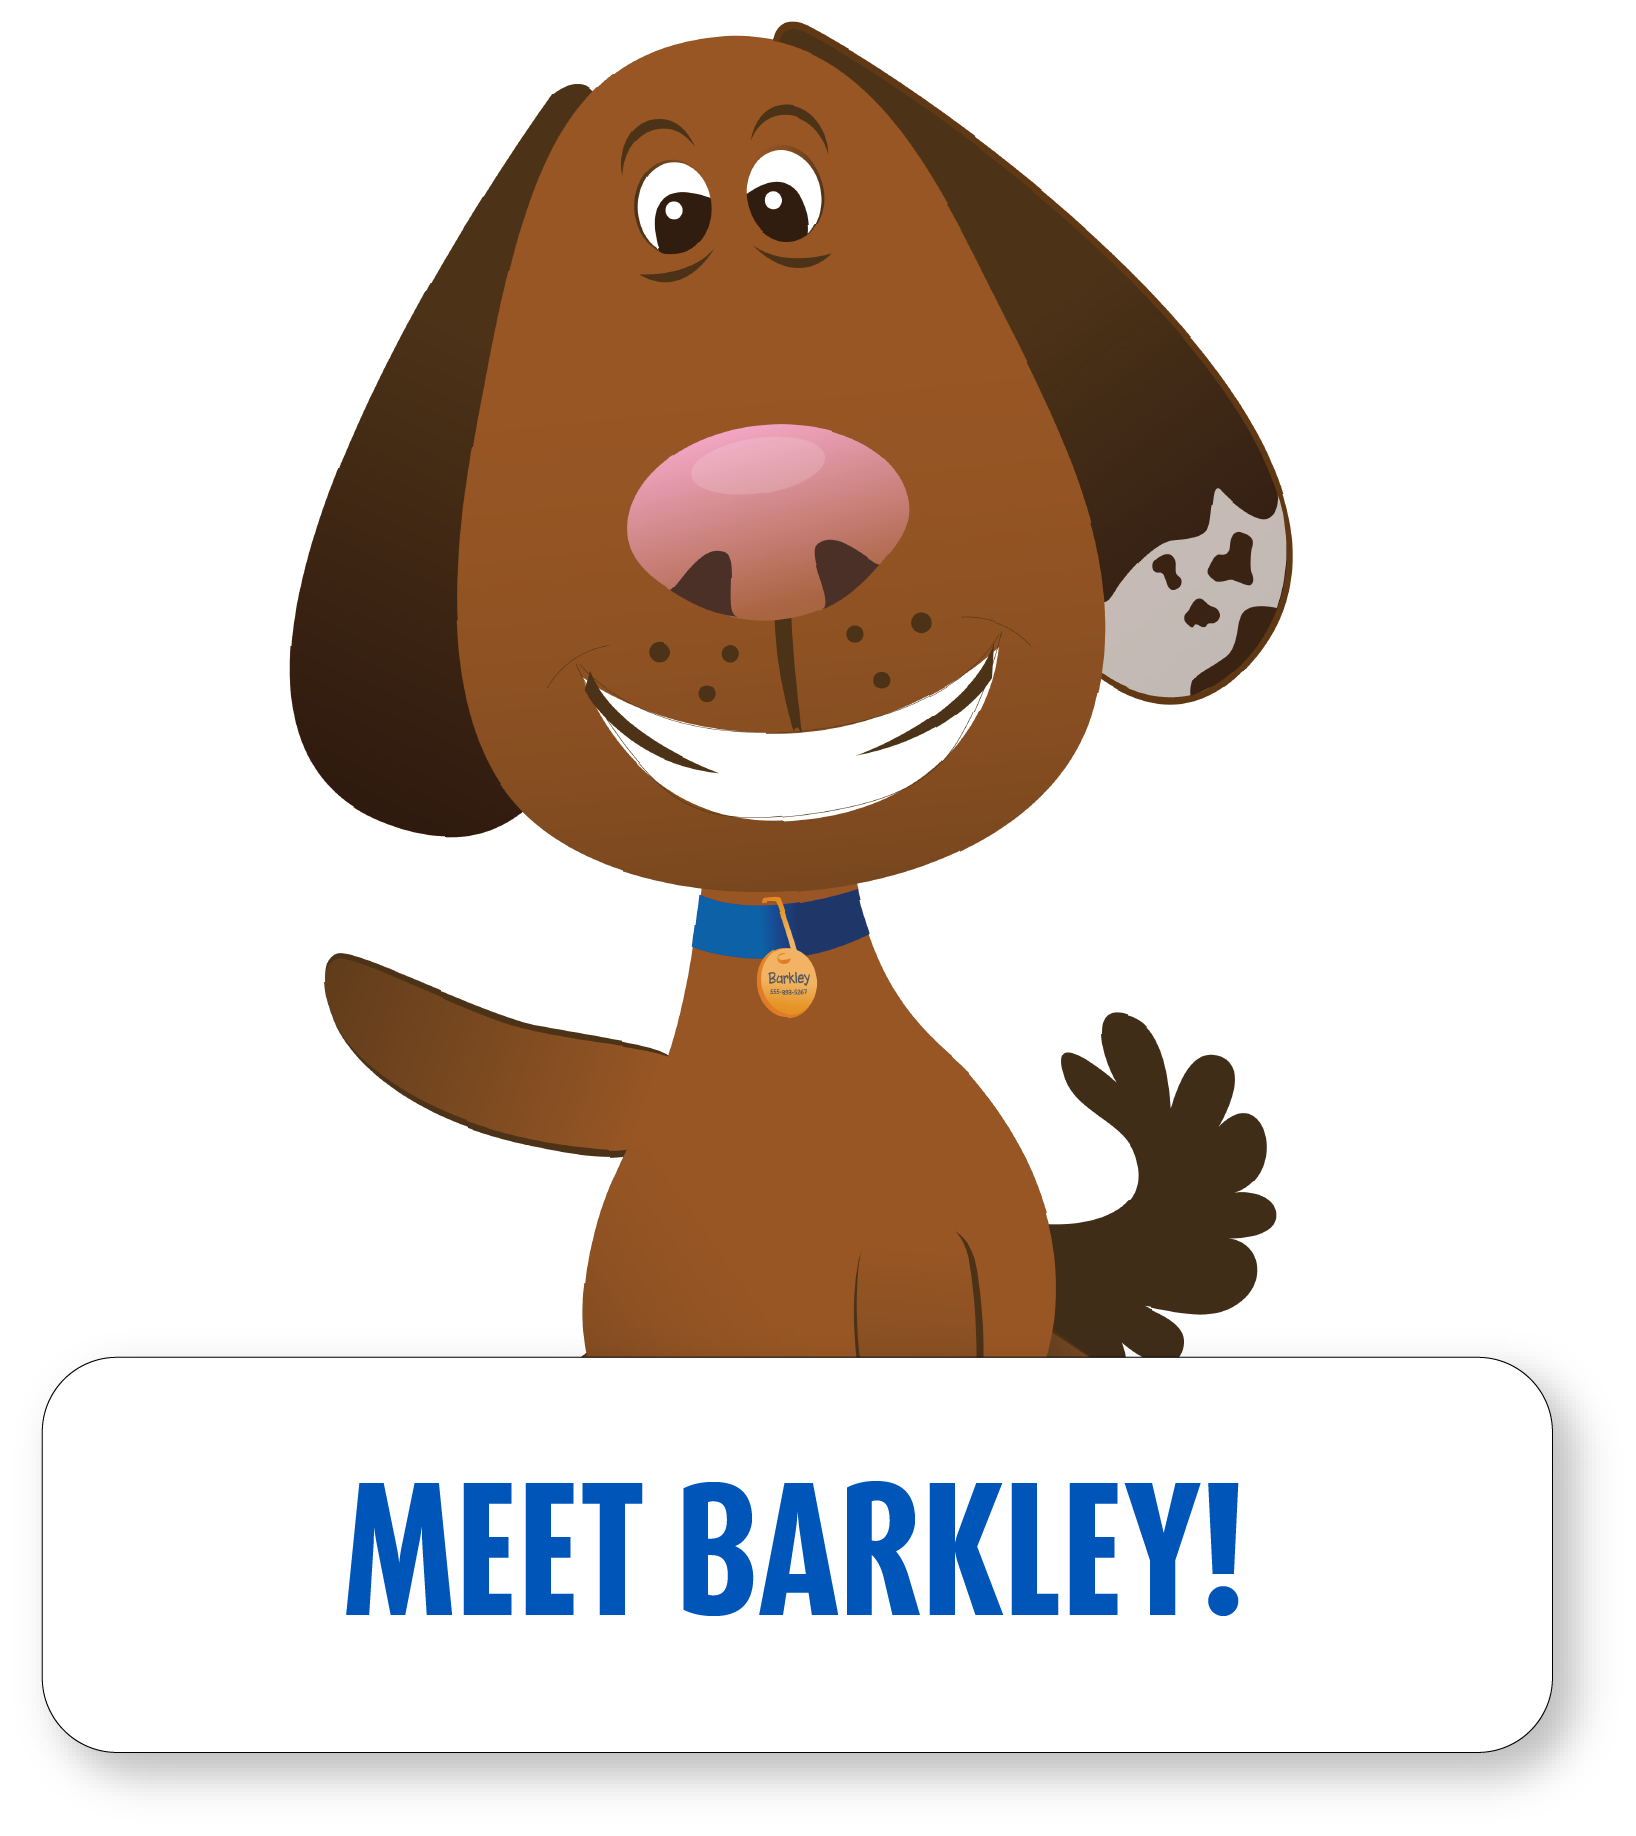 I'm Barkley! I'll be your guide to Kindergarten